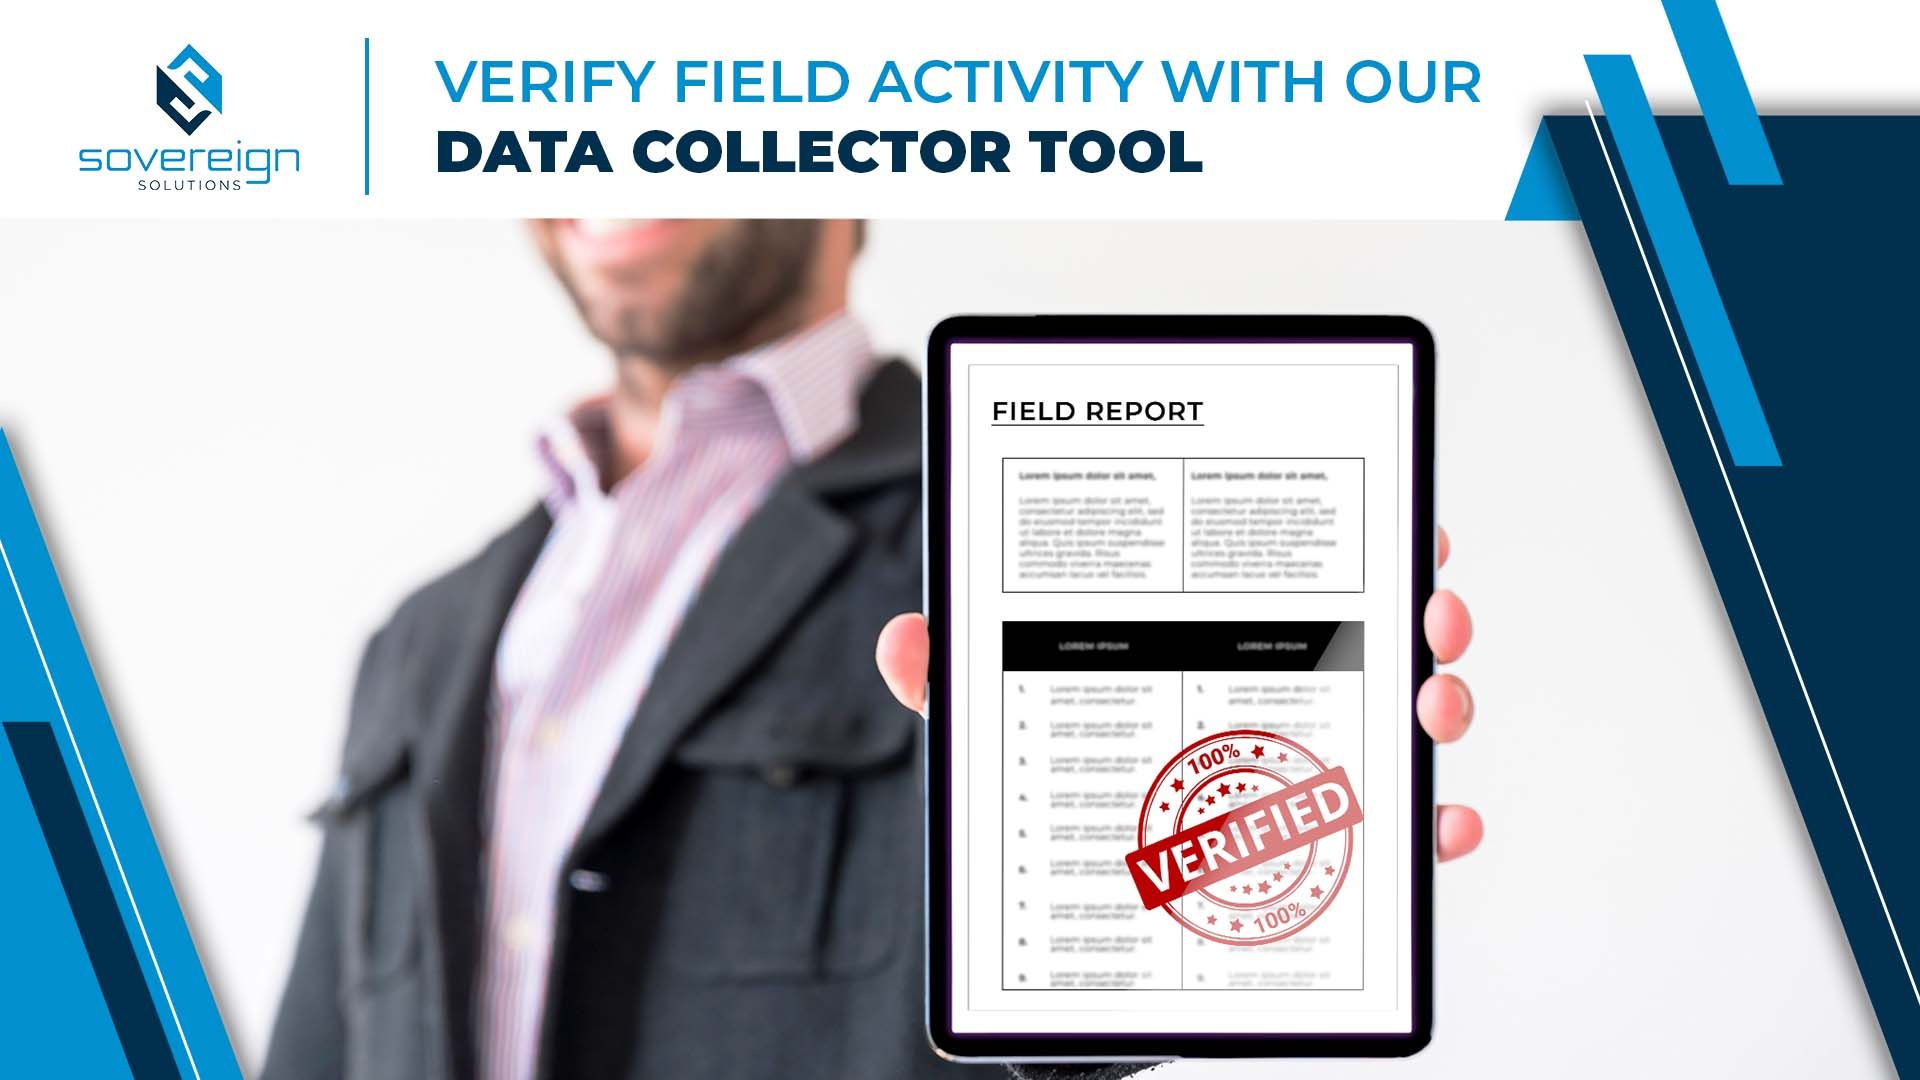 Verify field activity with the Data Collector tool